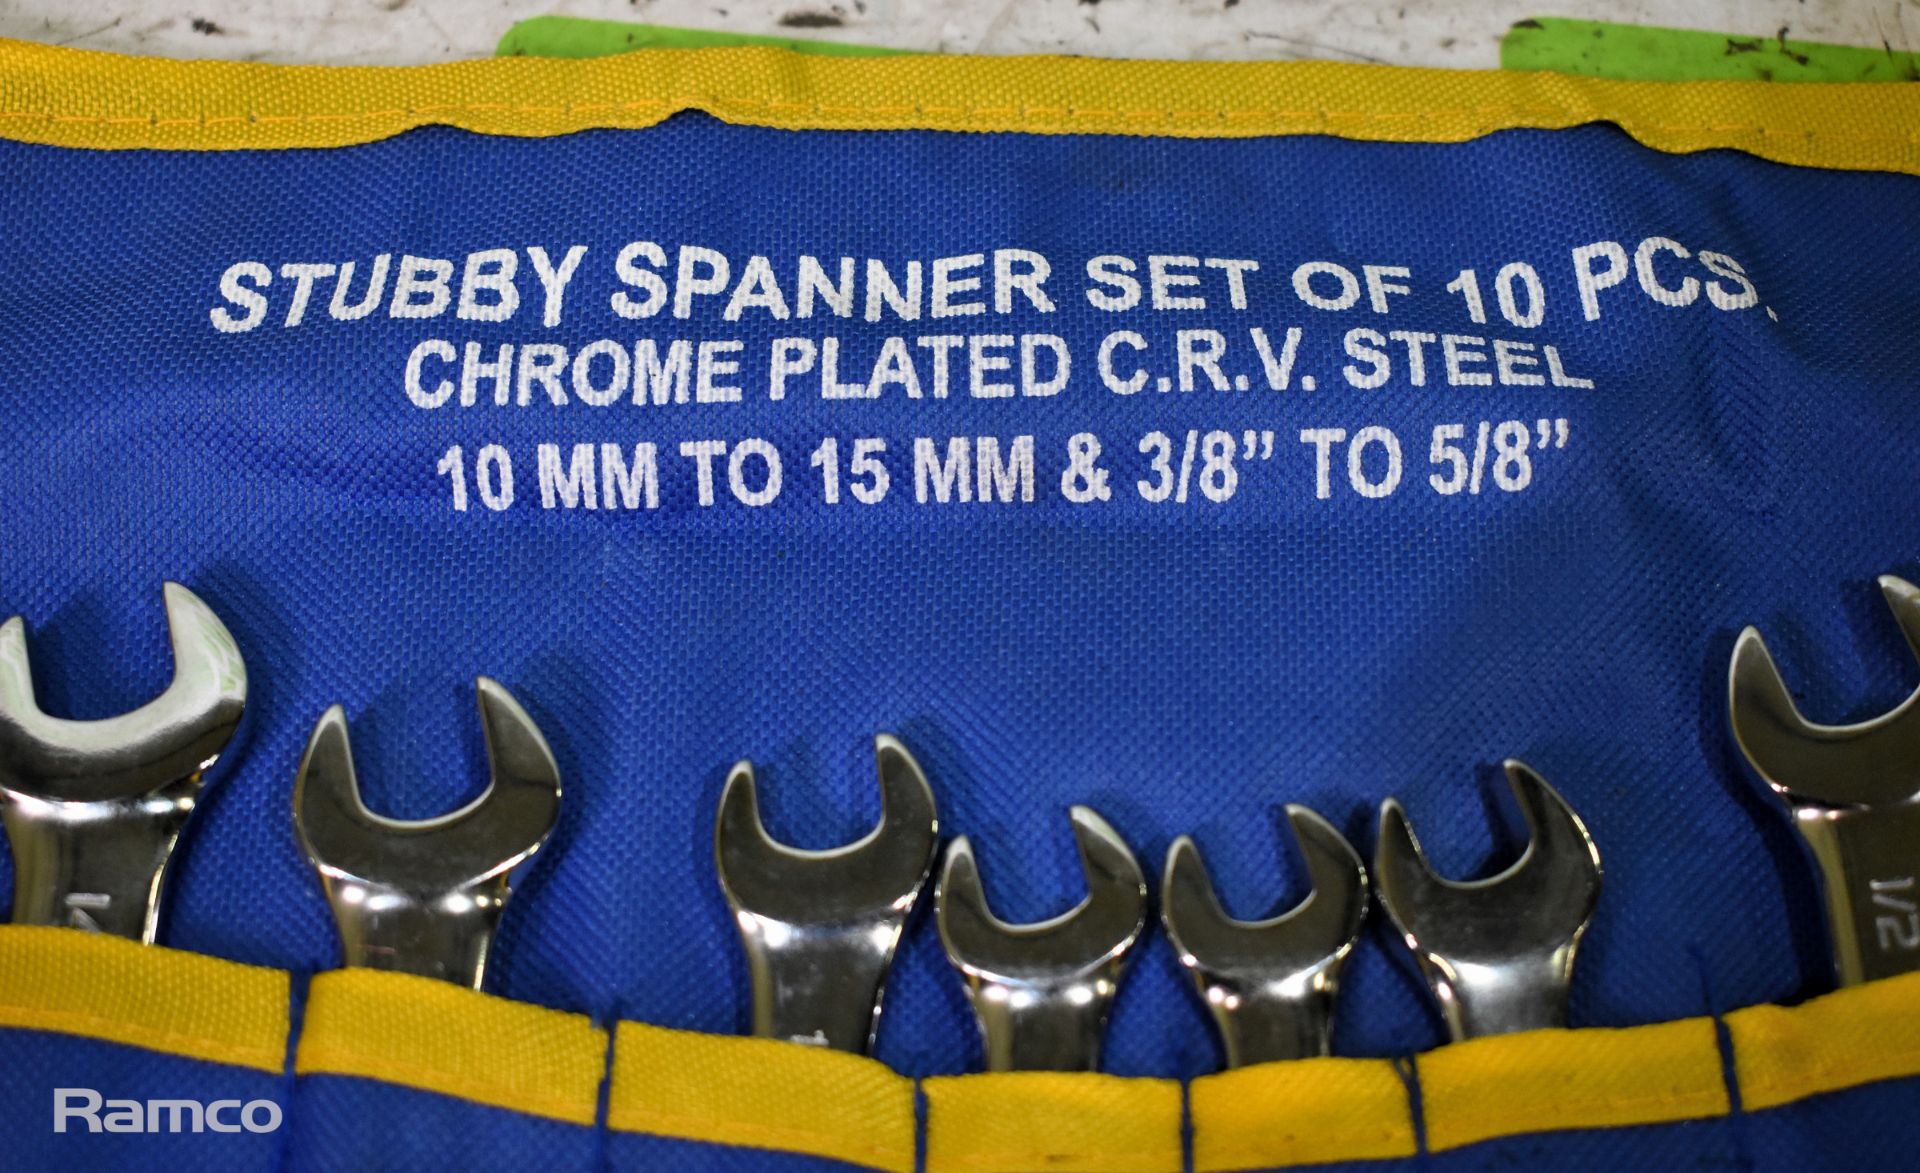 5x 10 piece stubby spanner sets, 100x Neilsen ultra thin steel cutting discs 115mm & more - Image 4 of 11